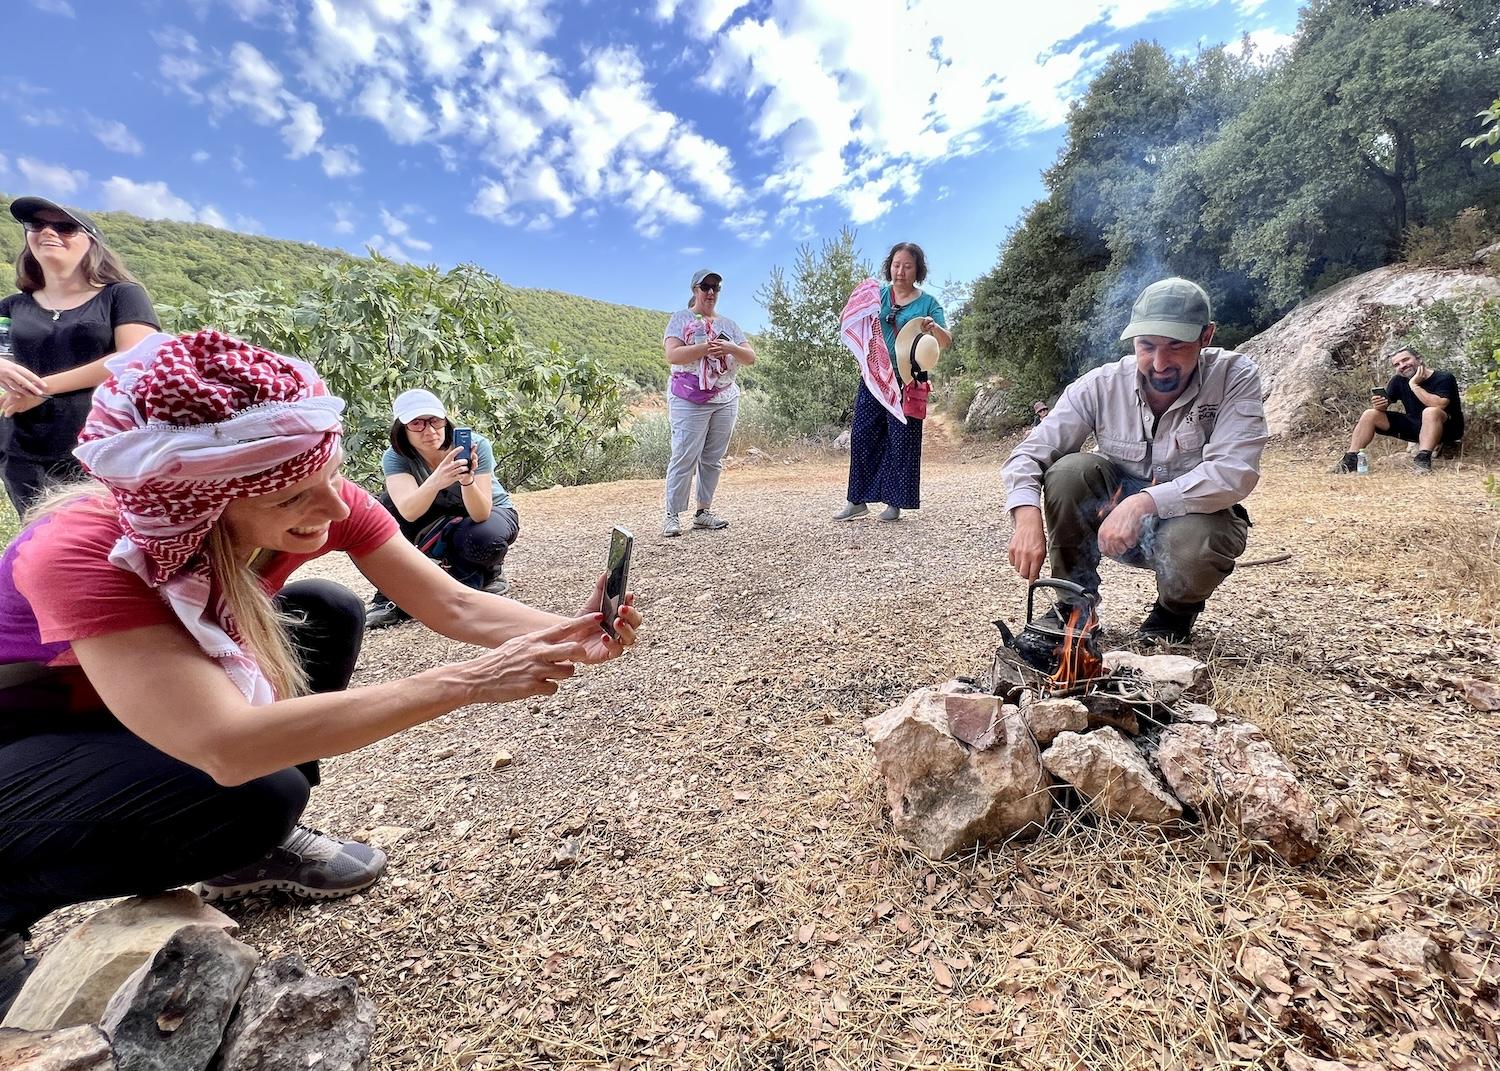 In Ajloun Forest Reserve, RSCN guide Rafat Mohamed Ali Quduh makes tea for hikers.